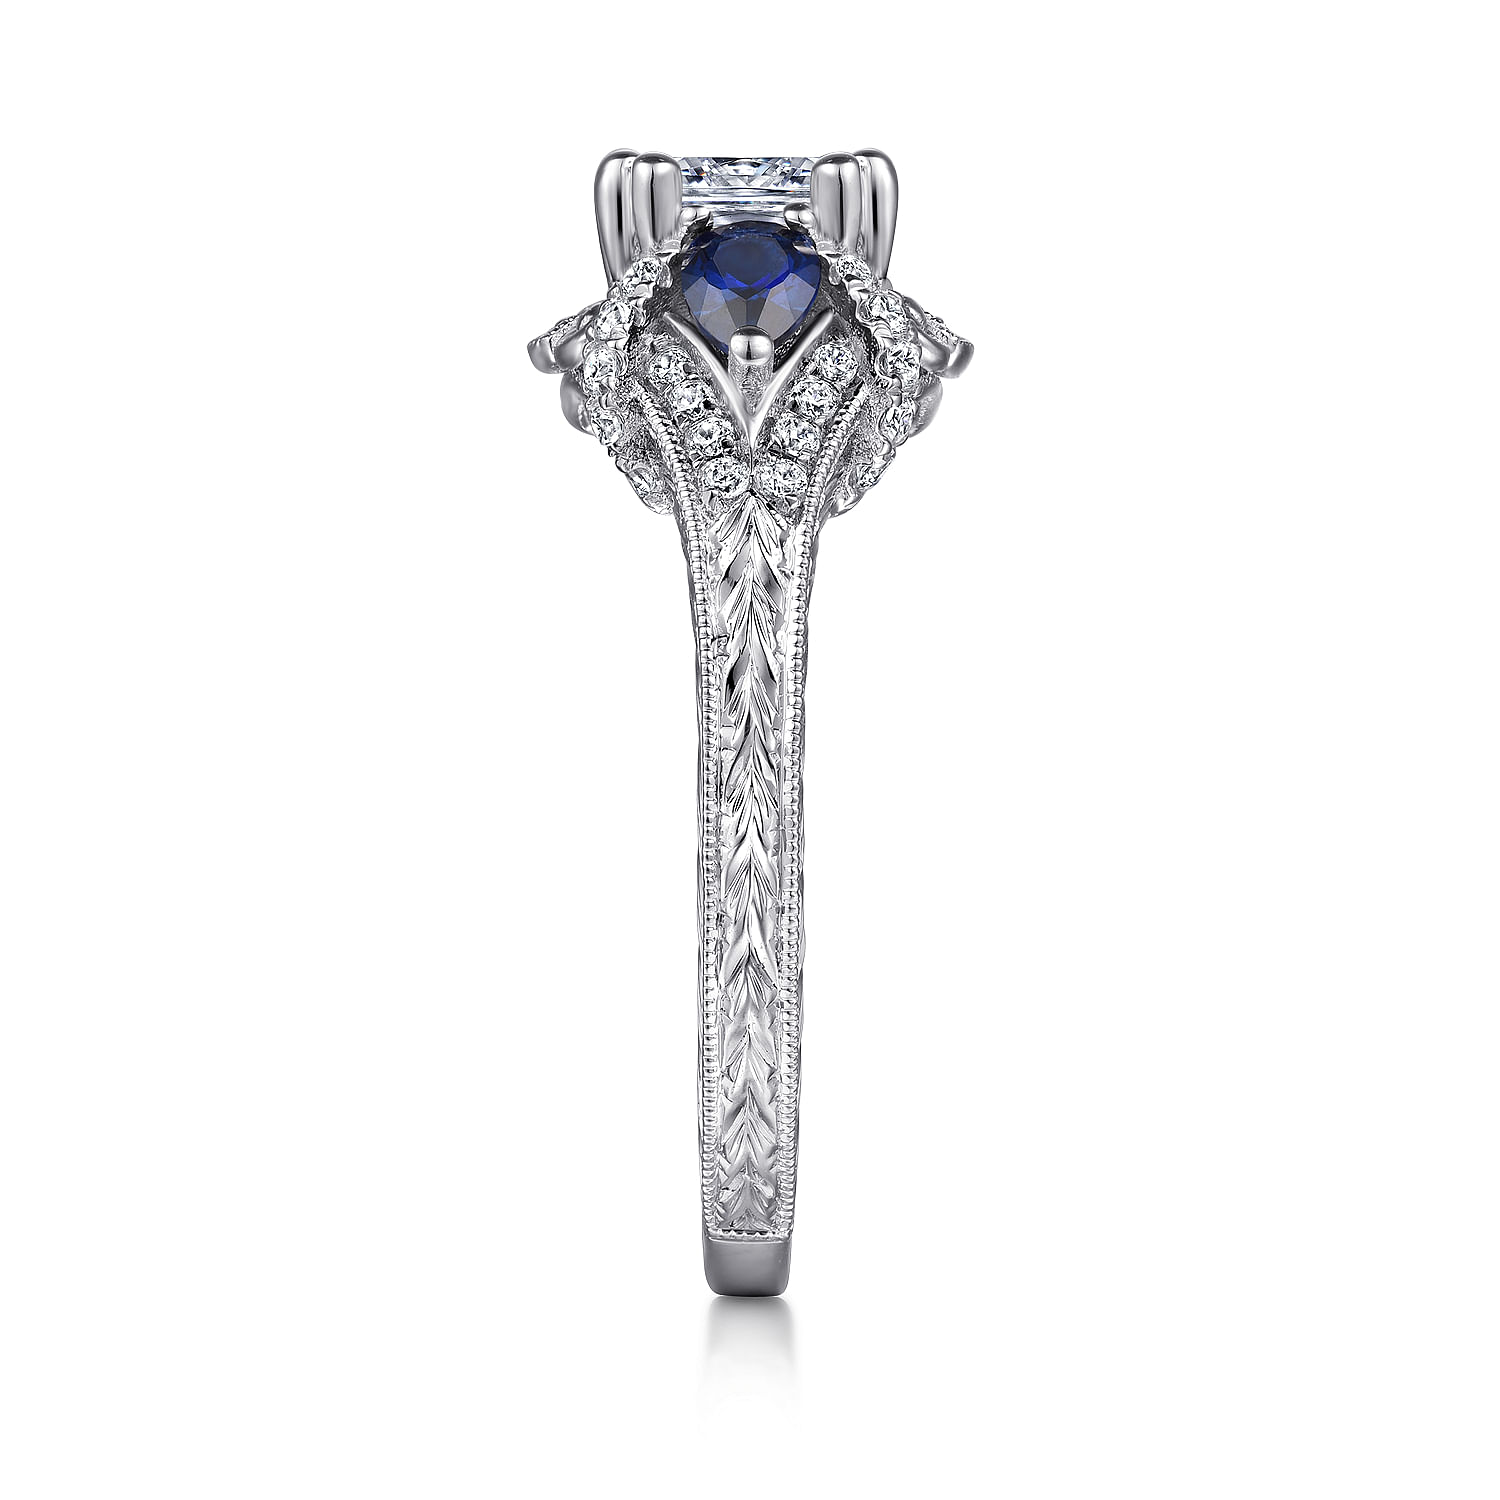 Vintage Inspired Platinum Cushion Cut Sapphire and Diamond Engagement Ring